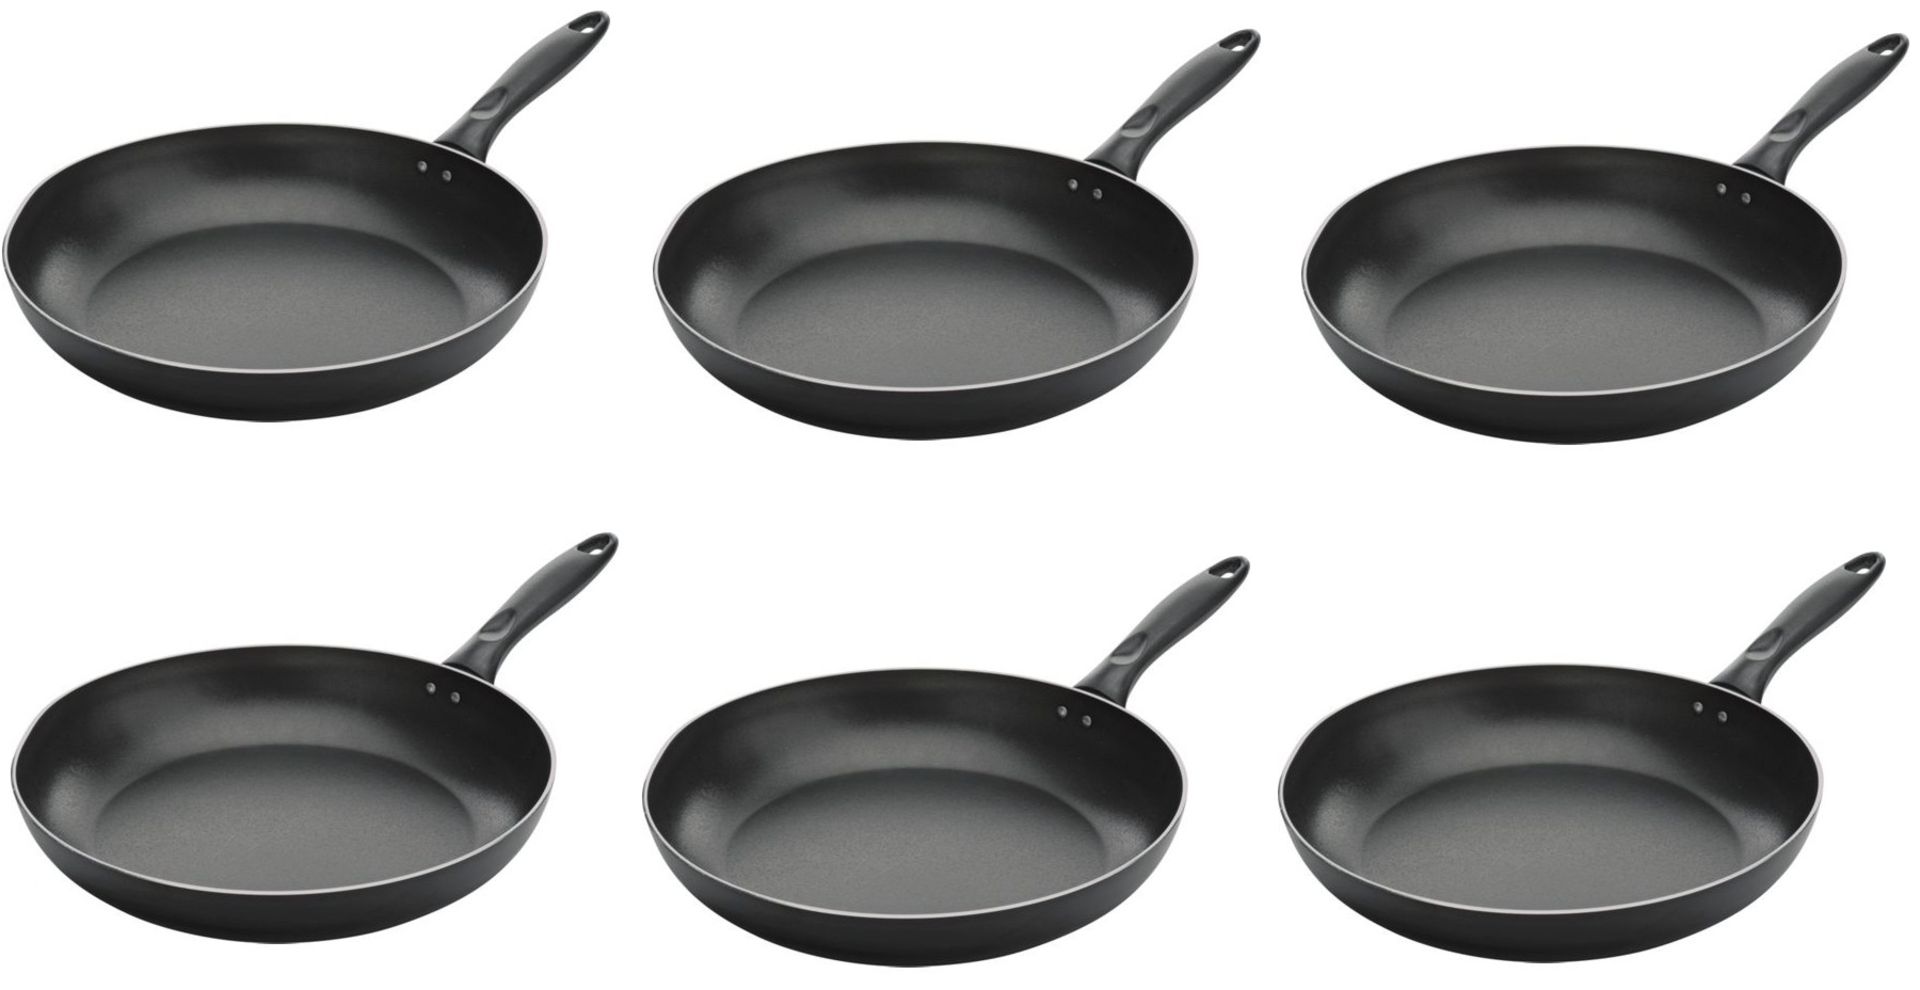 V *TRADE QTY* Brand New 6 x 20cm Aluminium Non-Stick Teflon coated Frying Pan With Stainless Steel